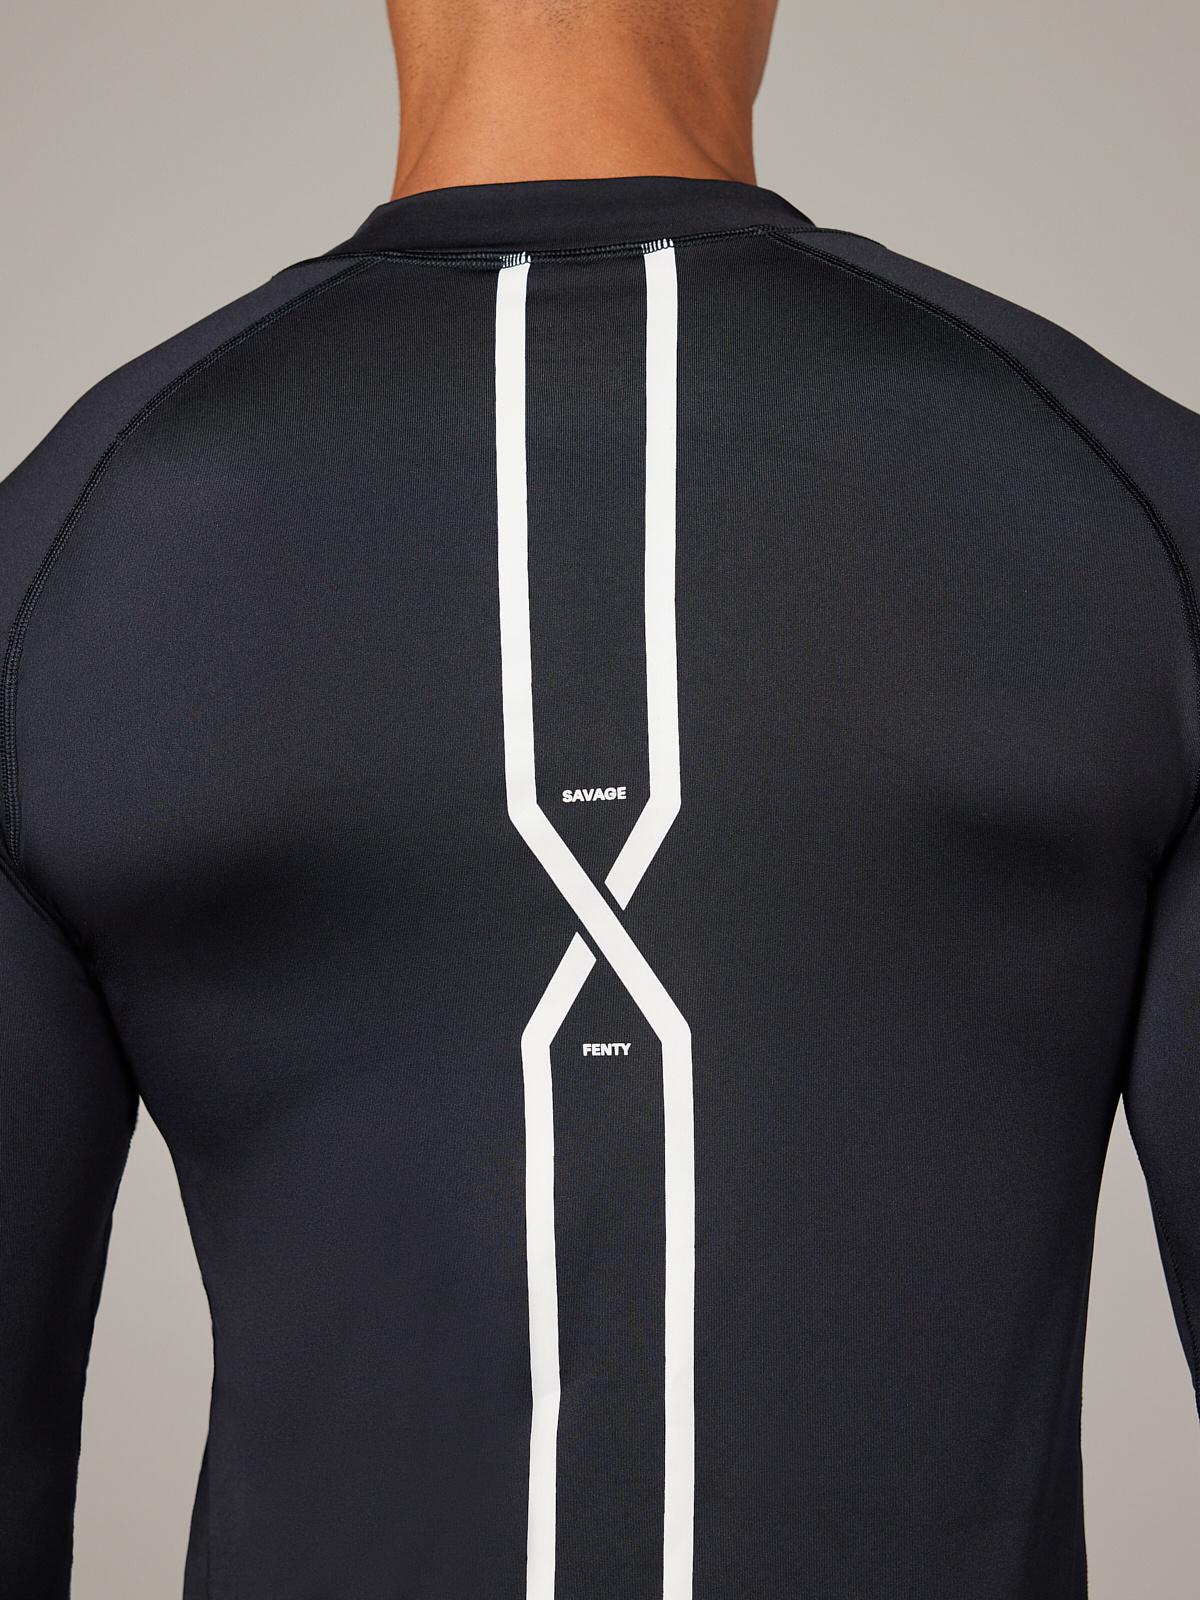 Breakout Base Layer Long-Sleeve Top